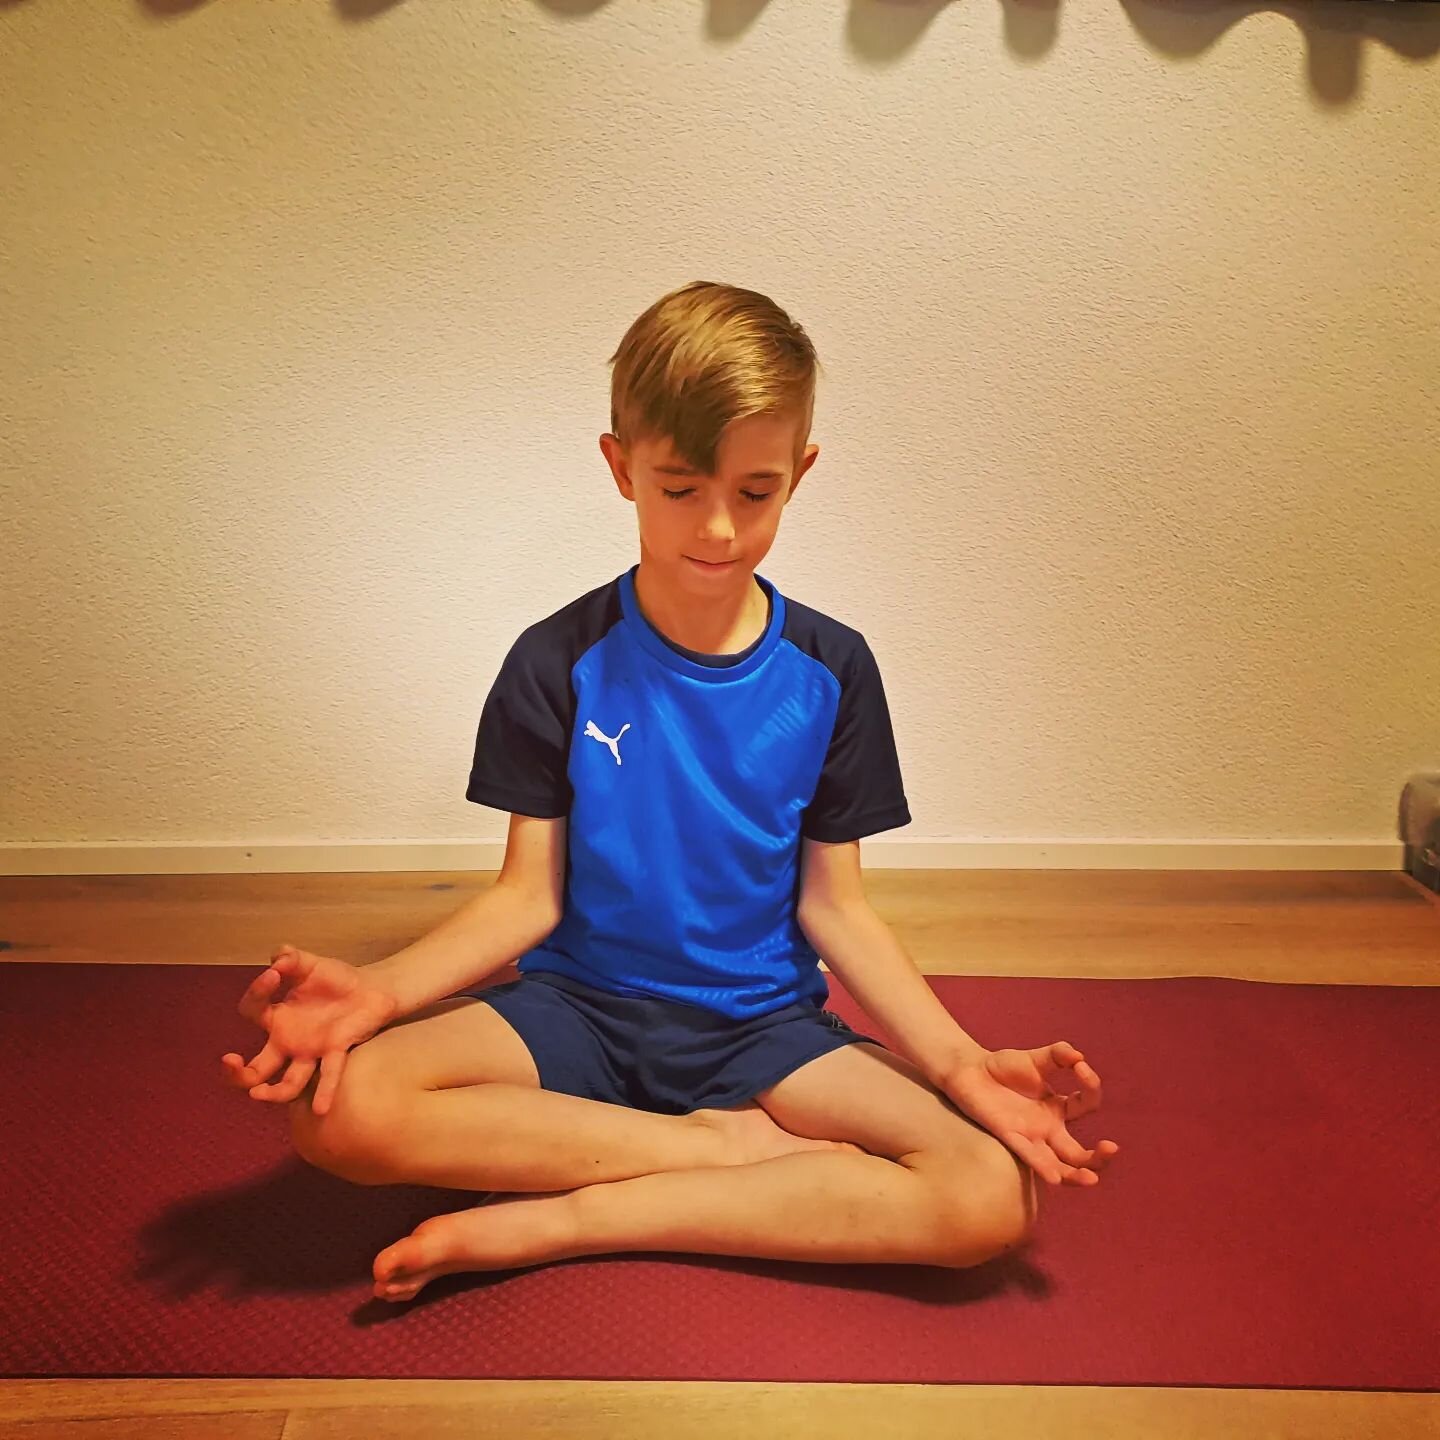 kidsyoga#mindfullness#justbe#fun#fantasie#relaxing#meditation#happykids

&ldquo;If every 8 year old in the world is taught meditation, we will eliminate violence from the world within one generation.&rdquo;
--Dalai Lama--